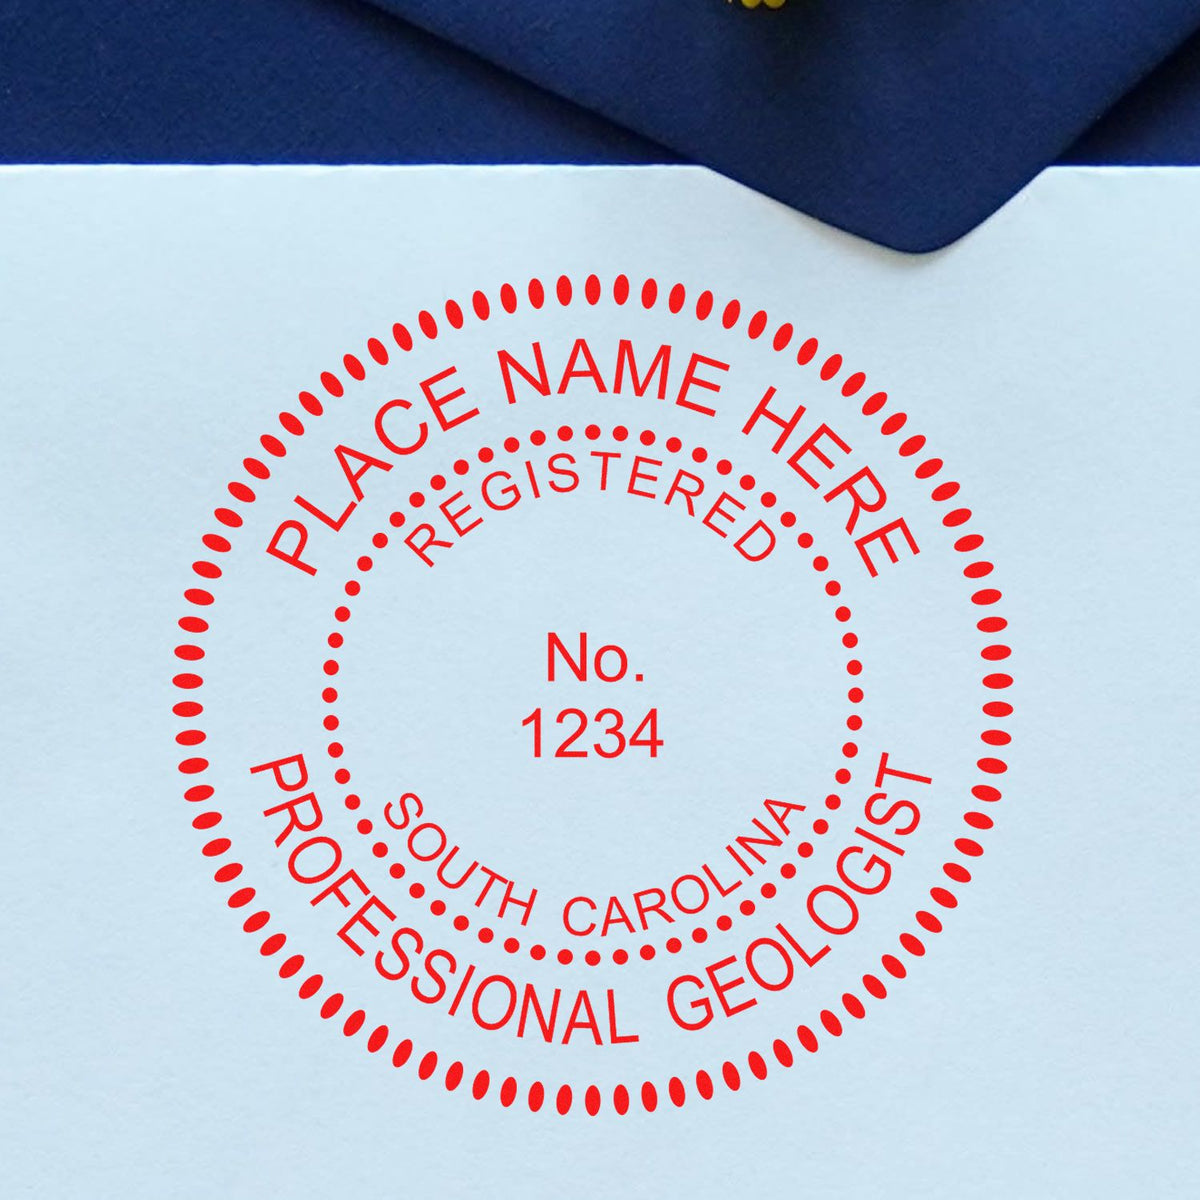 An in use photo of the South Carolina Professional Geologist Seal Stamp showing a sample imprint on a cardstock